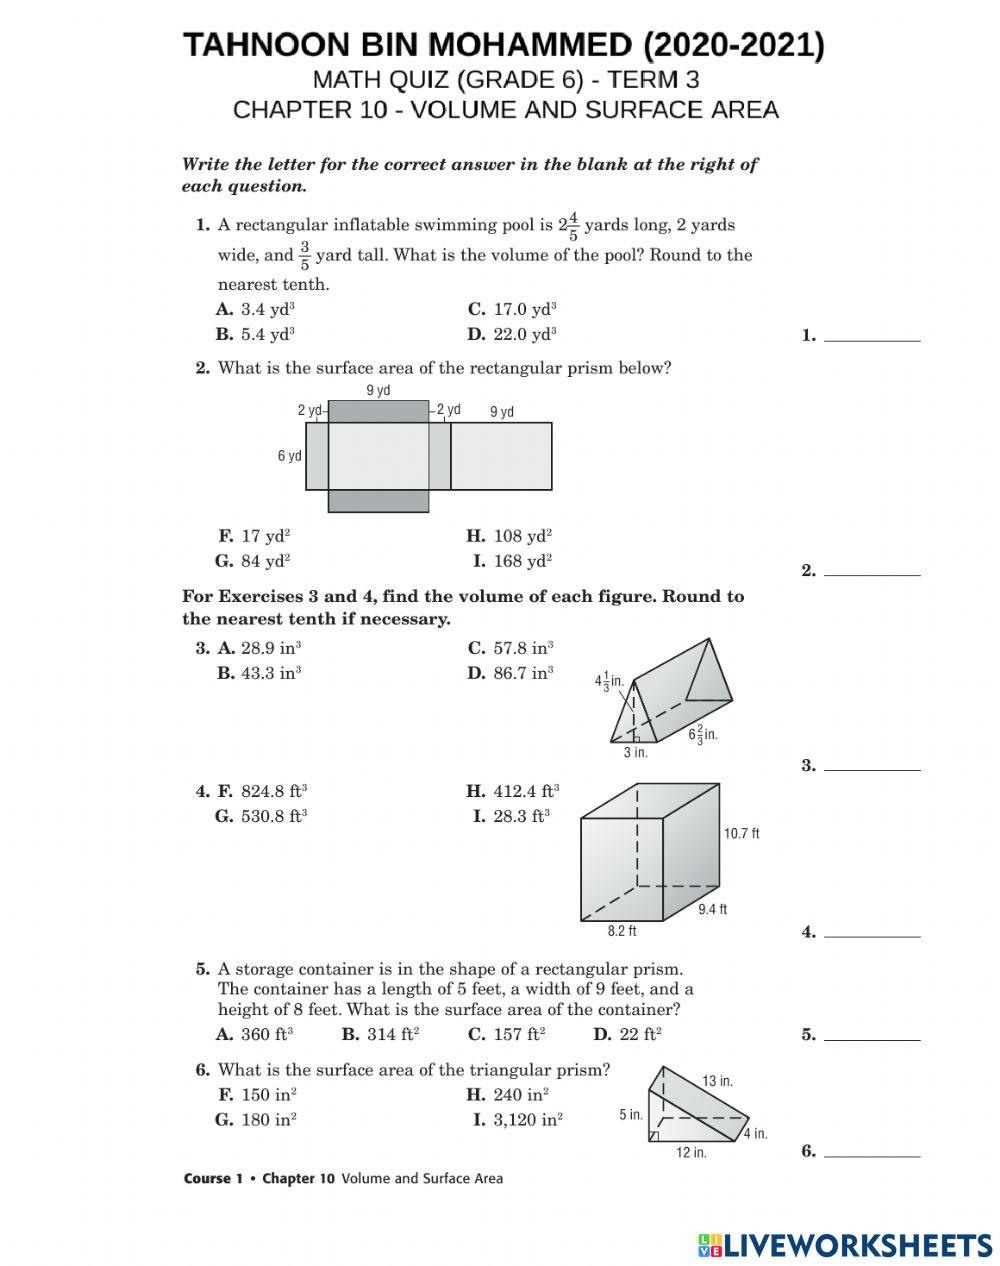 Review assessment - chapter 10 - volume and surface area